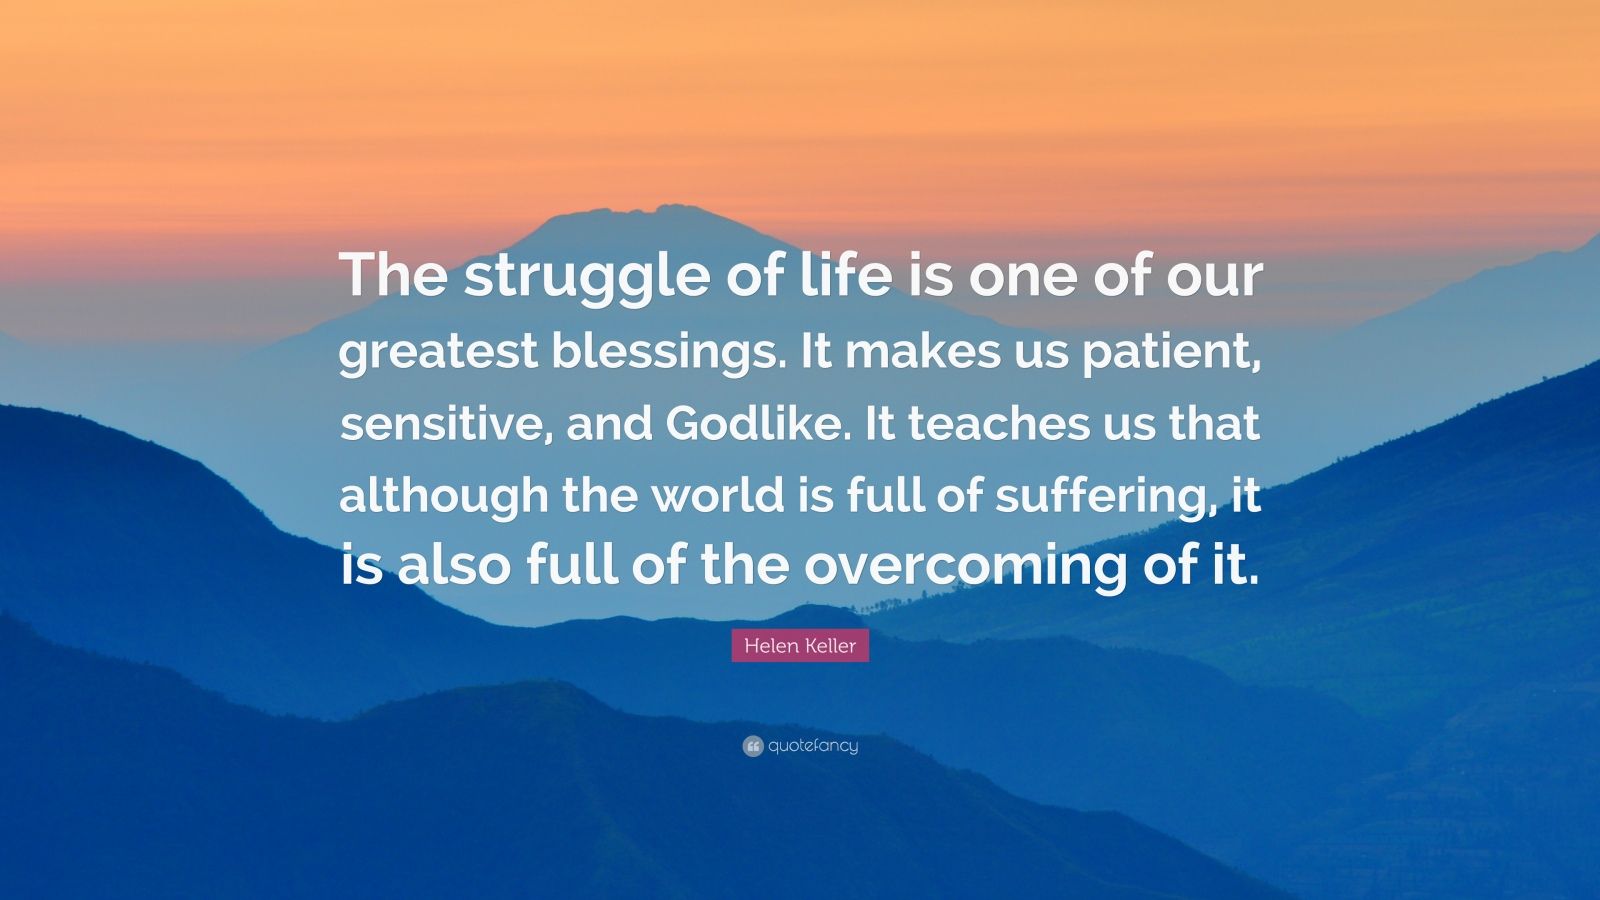 Helen Keller Quote: “The struggle of life is one of our greatest